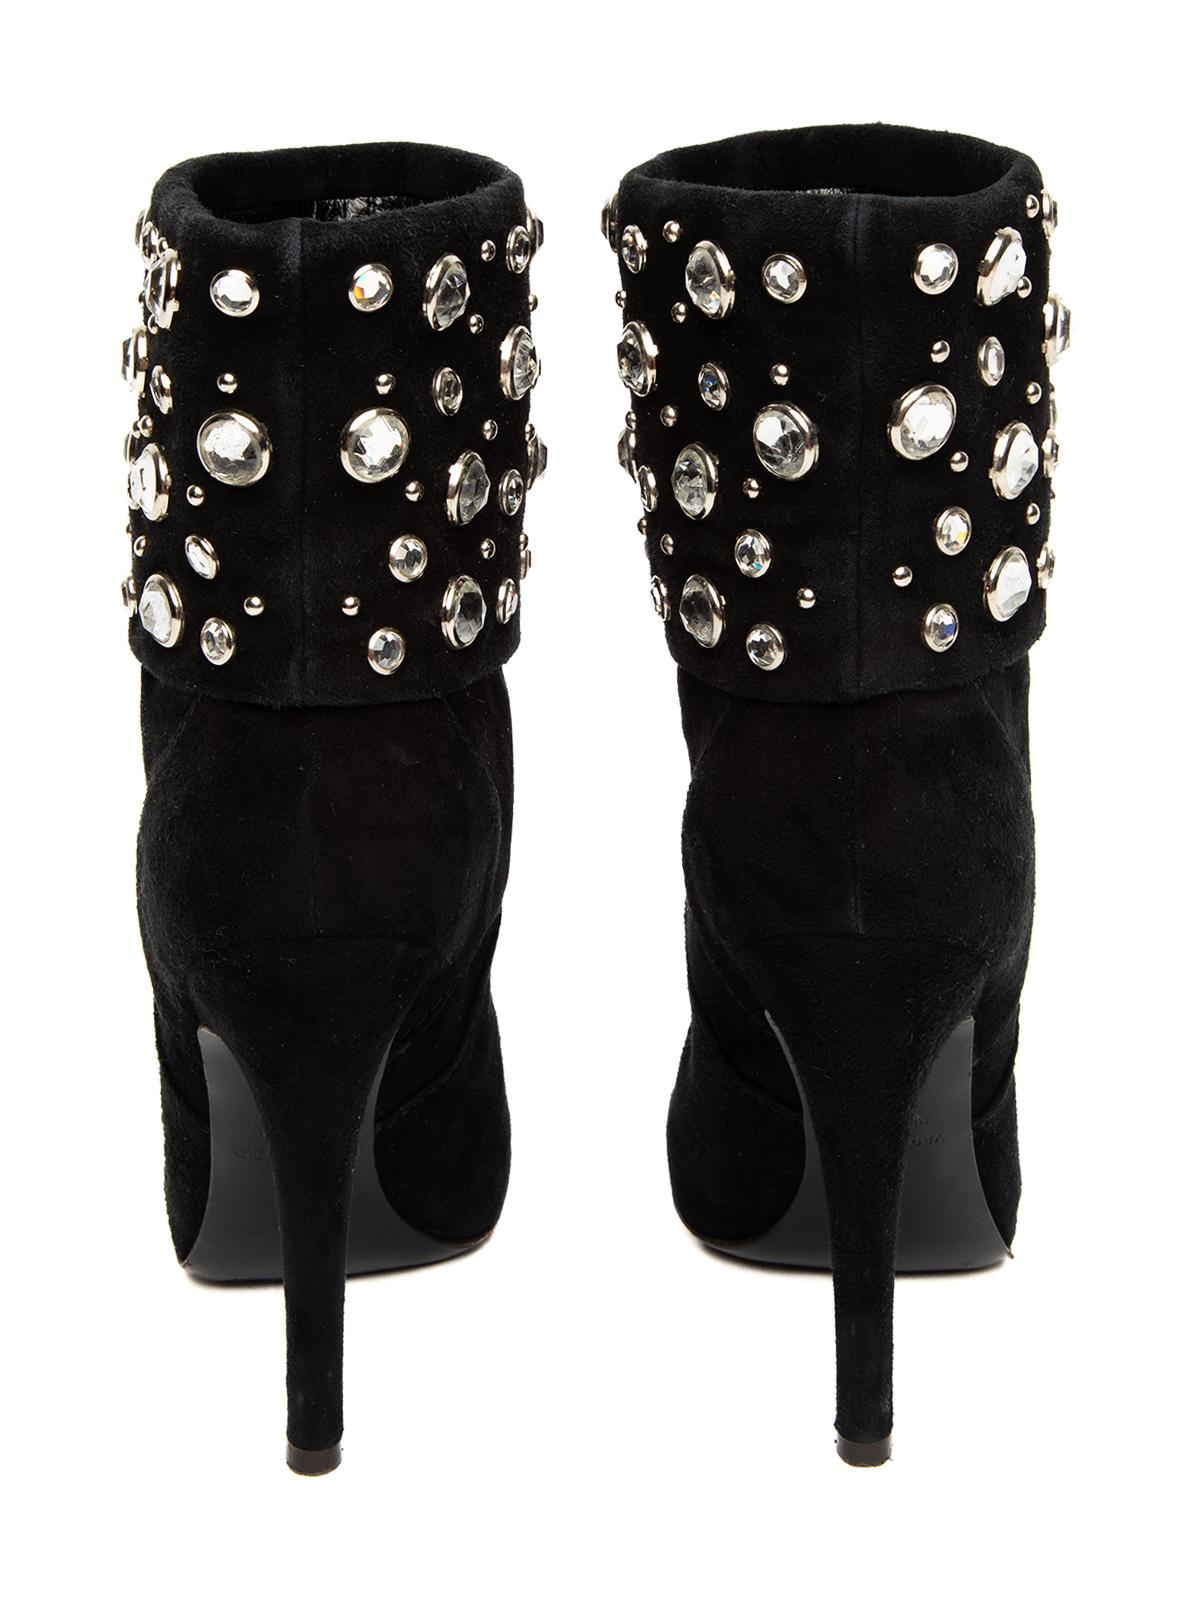 Pre-Loved Giuseppe Zanotti Women's Suede Crystal Studded Ankle Boots In Good Condition For Sale In London, GB